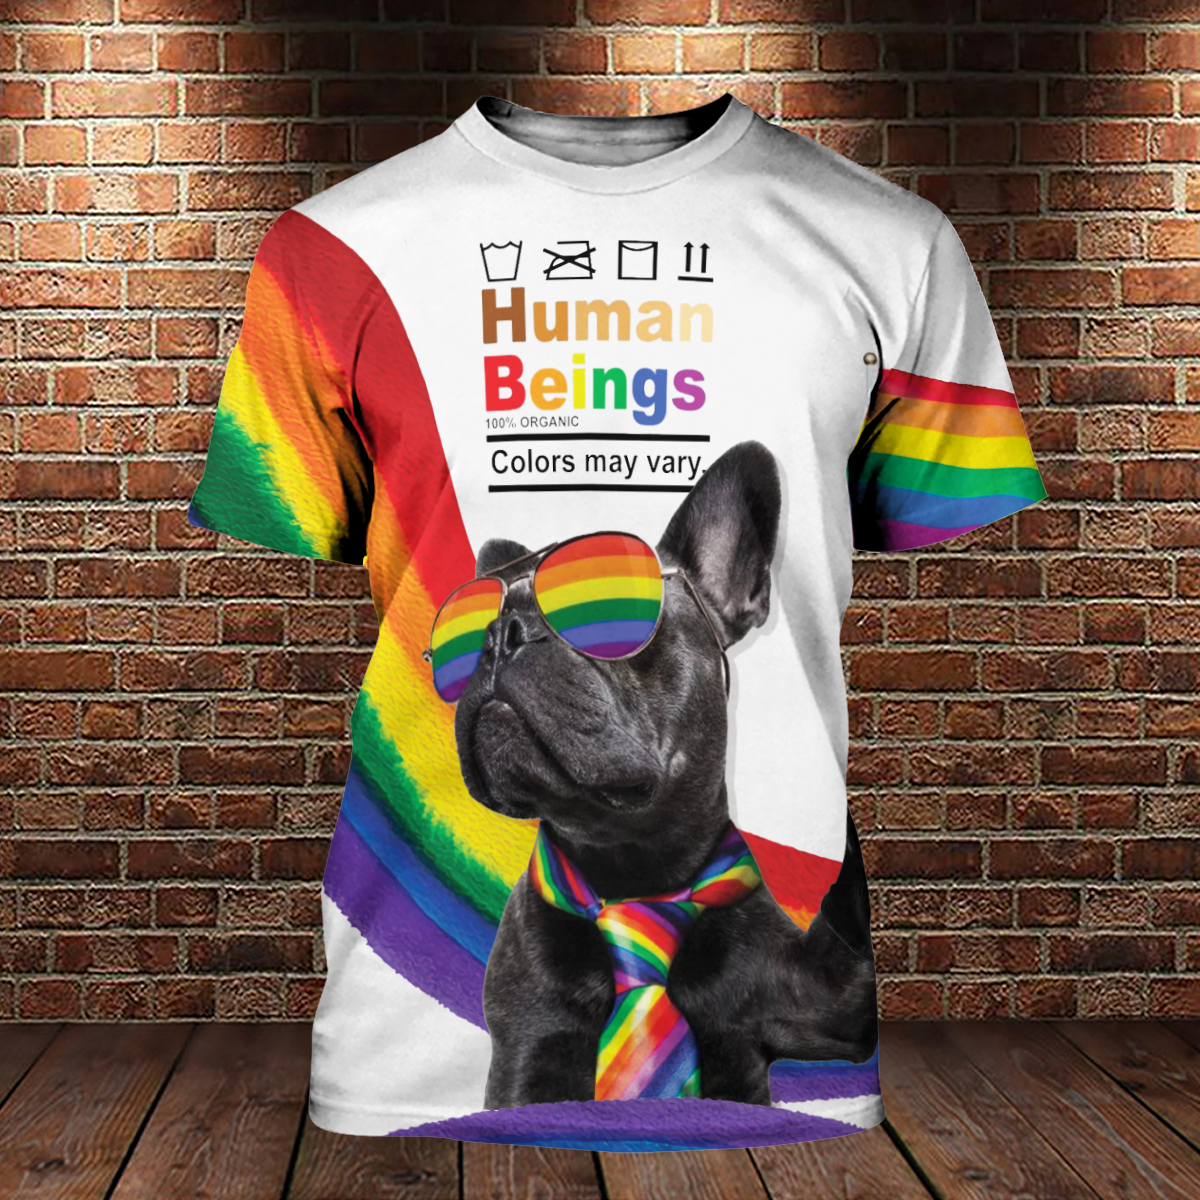 Rainbow Striped Shirt/ Human Being 3D All Over Printed Shirts For LGBT Community/ Bisexual Shirts